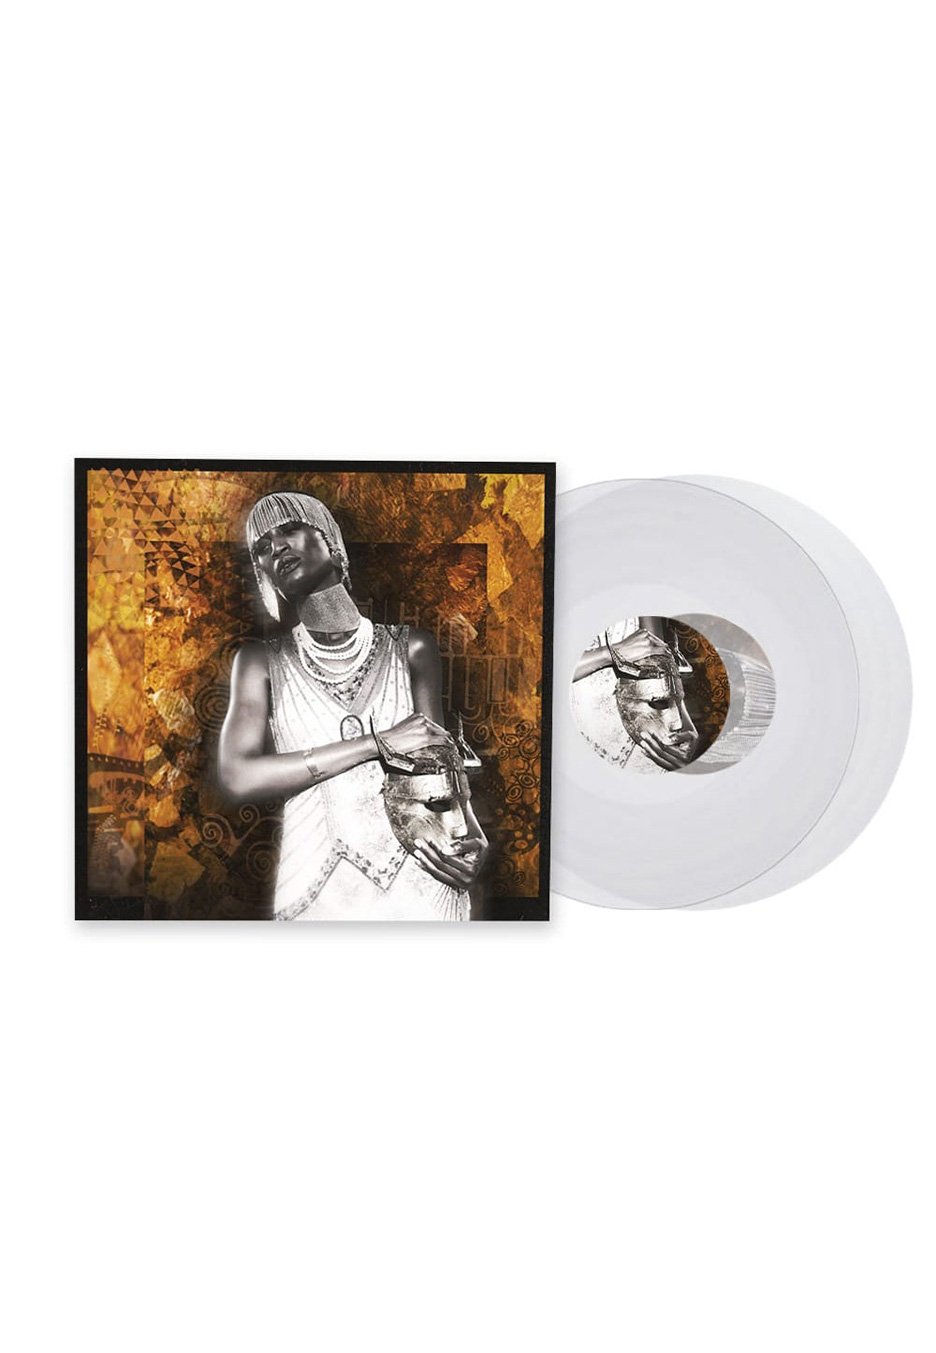 Imperial Triumphant - Spirit Of Ecstasy Ultra Clear - Colored 2 Vinyl